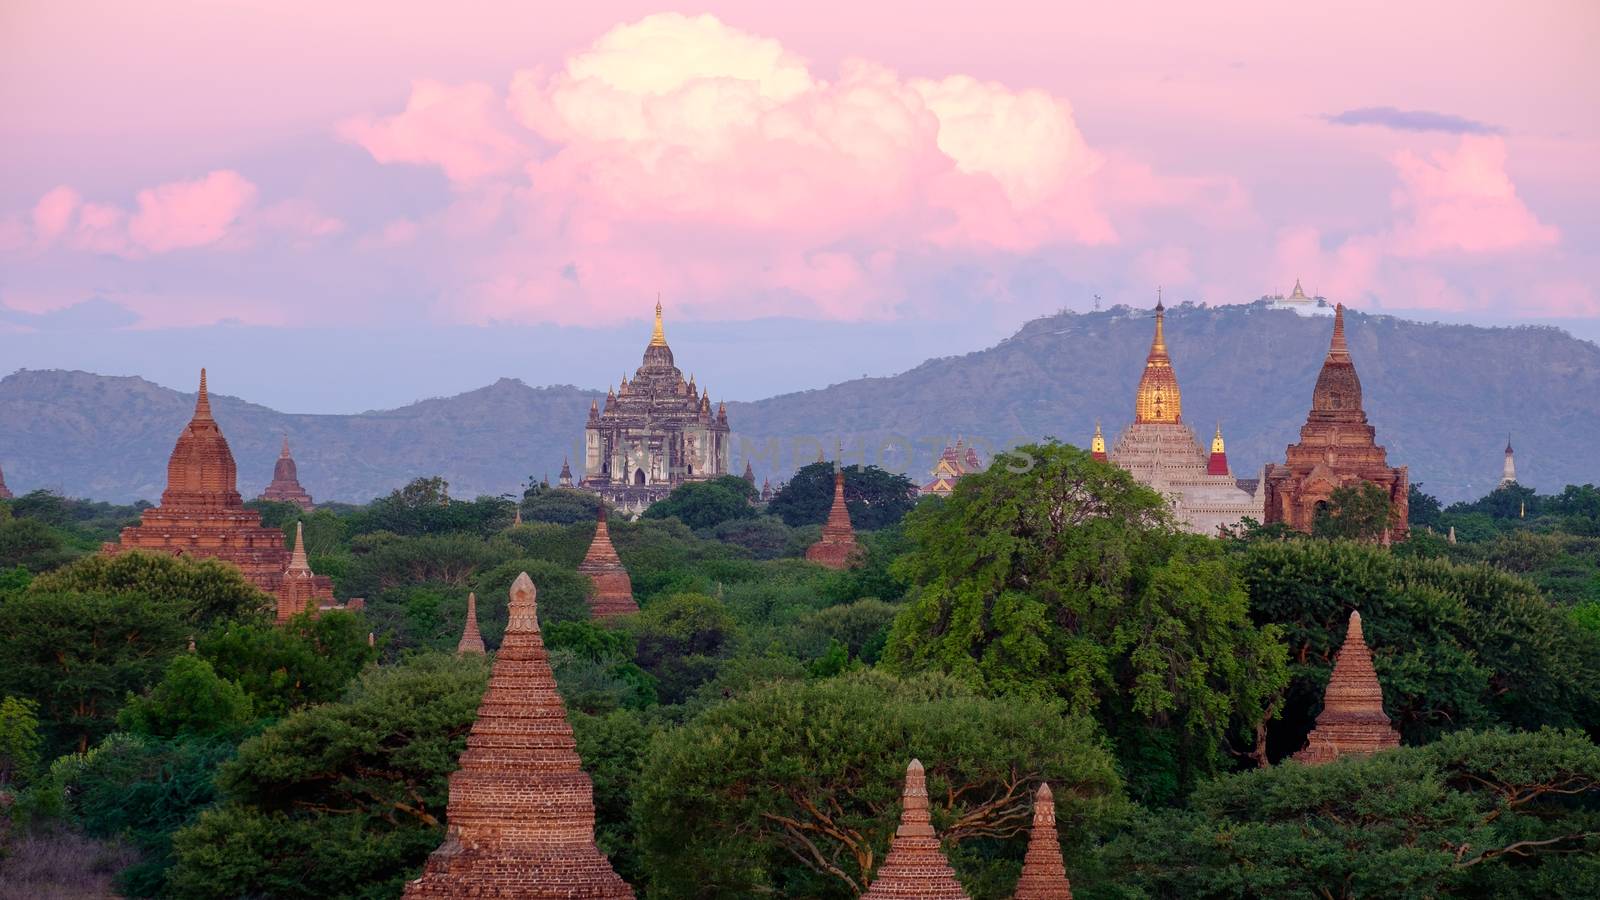 Landscape view of sunrise with ancient temples, Bagan, Myanmar by martinm303